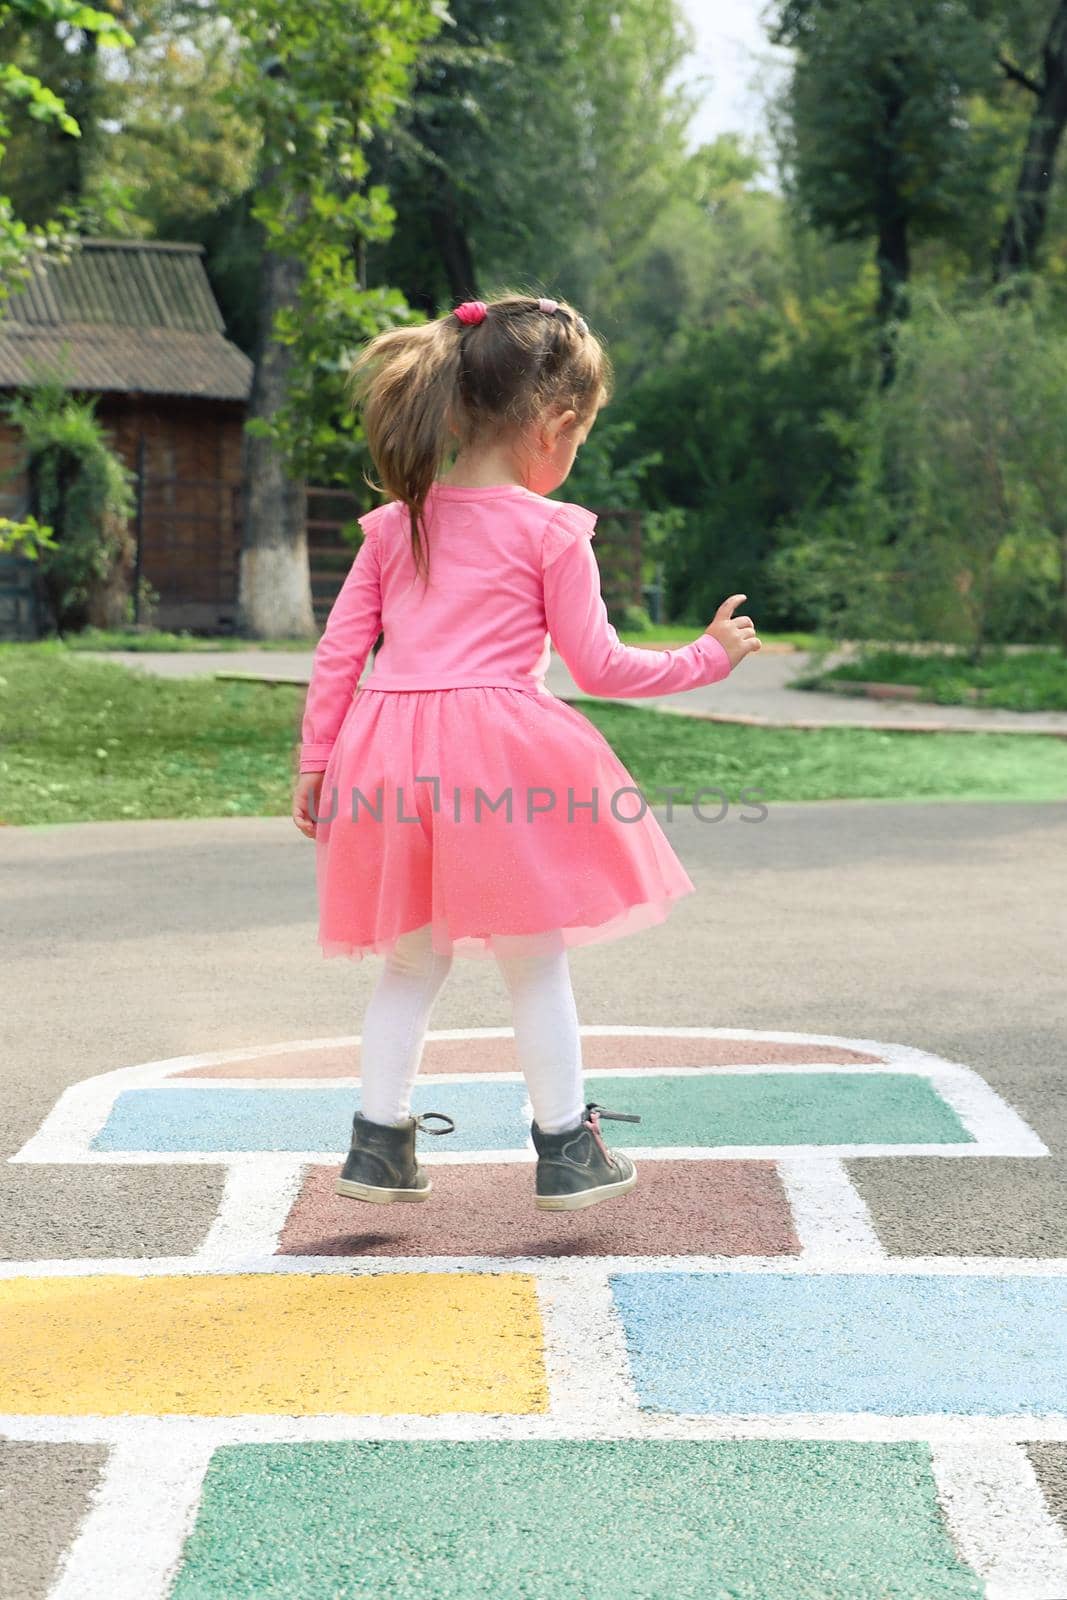 Little girl in a pink dress plays hopscotch on the street